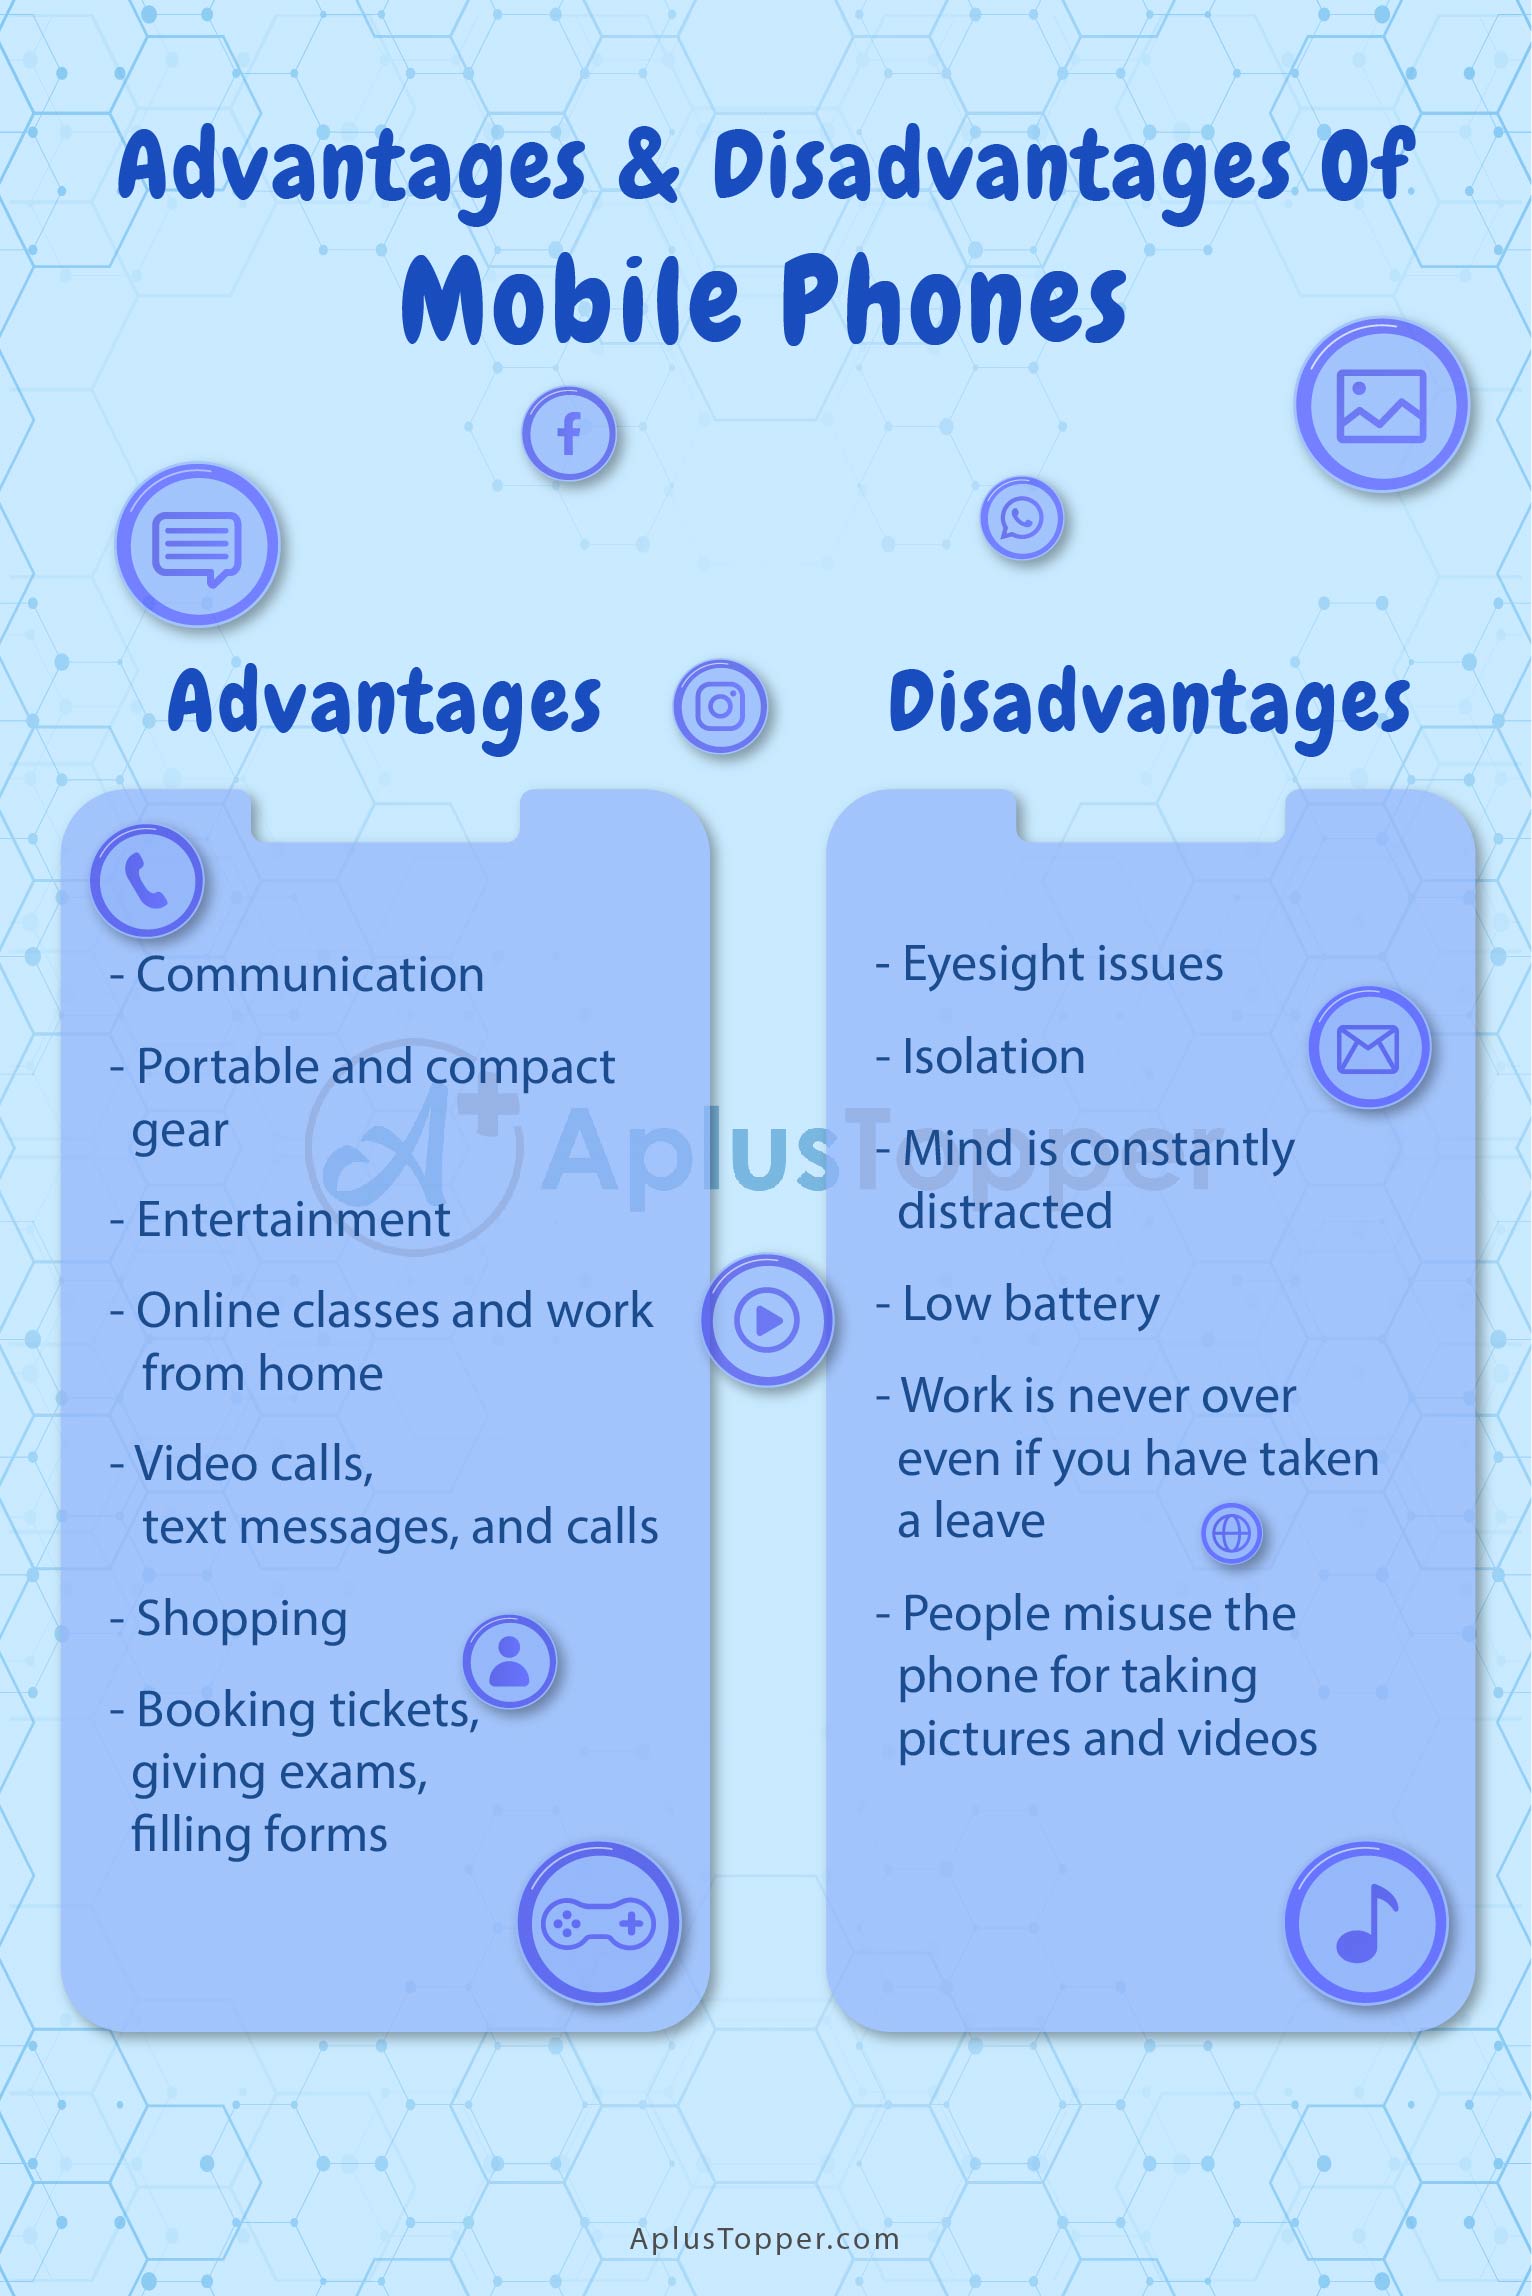 Advantages and disadvantages of mobile phone موبائل فون کے فائدے